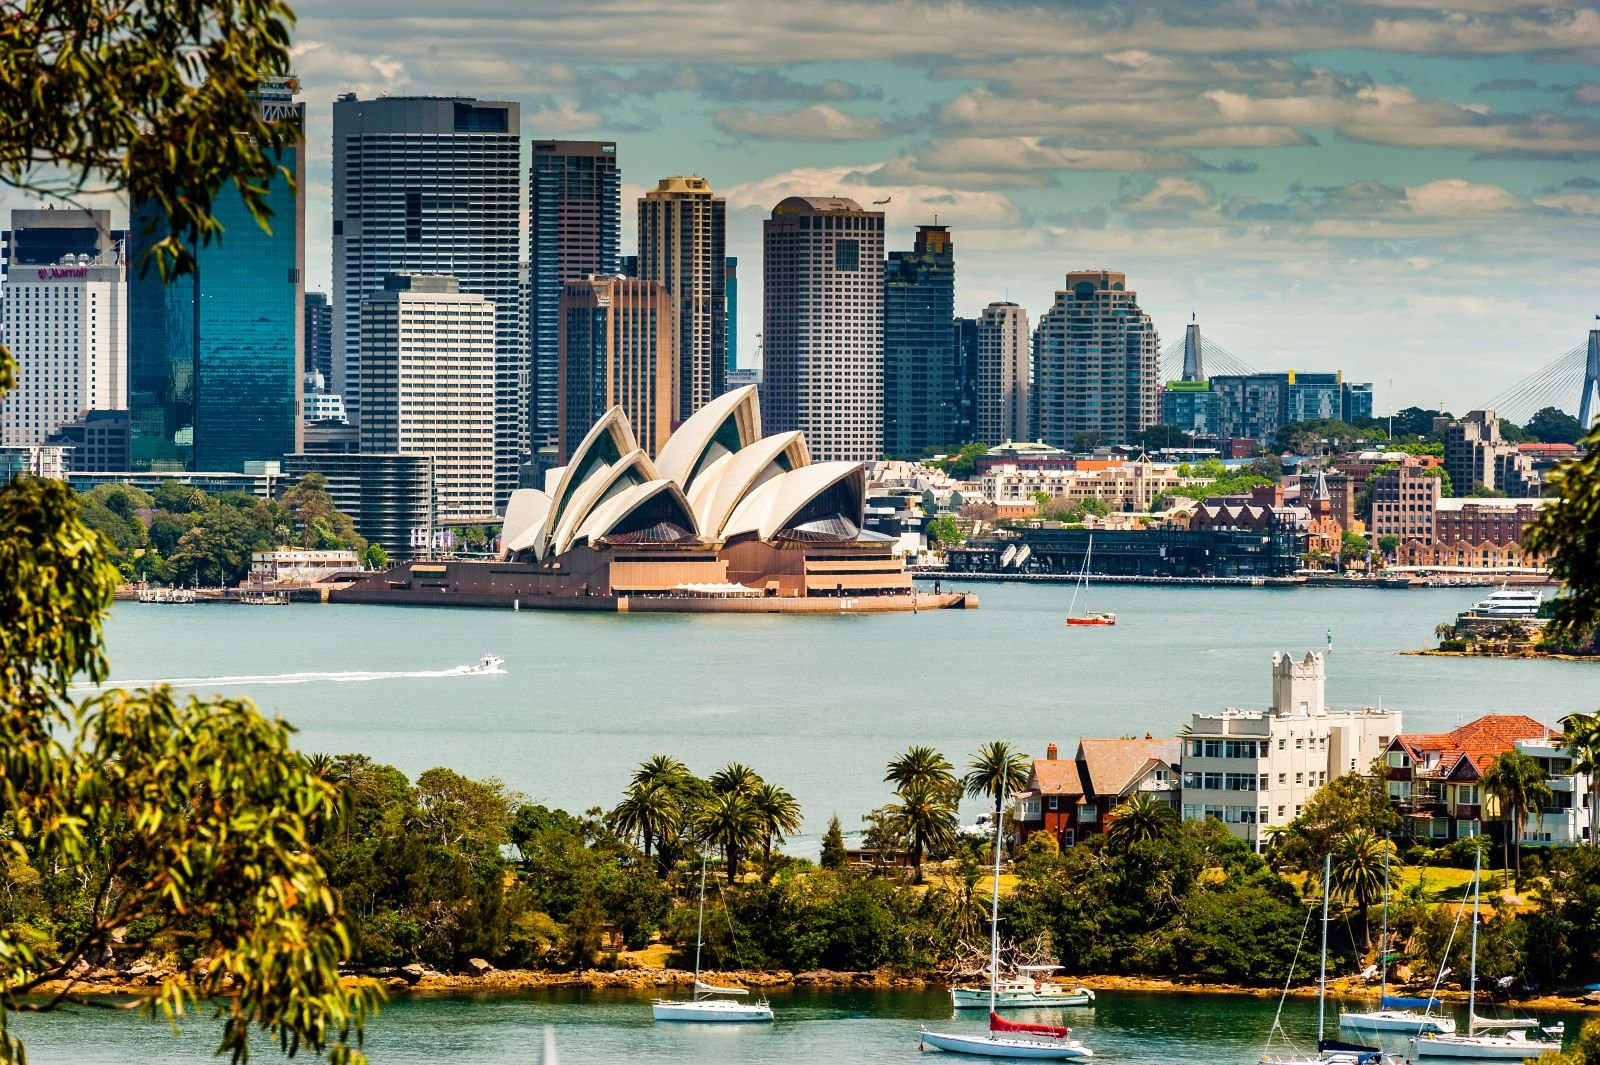 <p>A few bridges are open for the public to climb and offer mesmerizing views of the city landmarks from the top. Some famous bridge climbs include Brisbane Story Bridge, Matagarup Bridge, Auckland Bridge, Porto Bridge, and Akashi Kaikyo Bridge.</p>